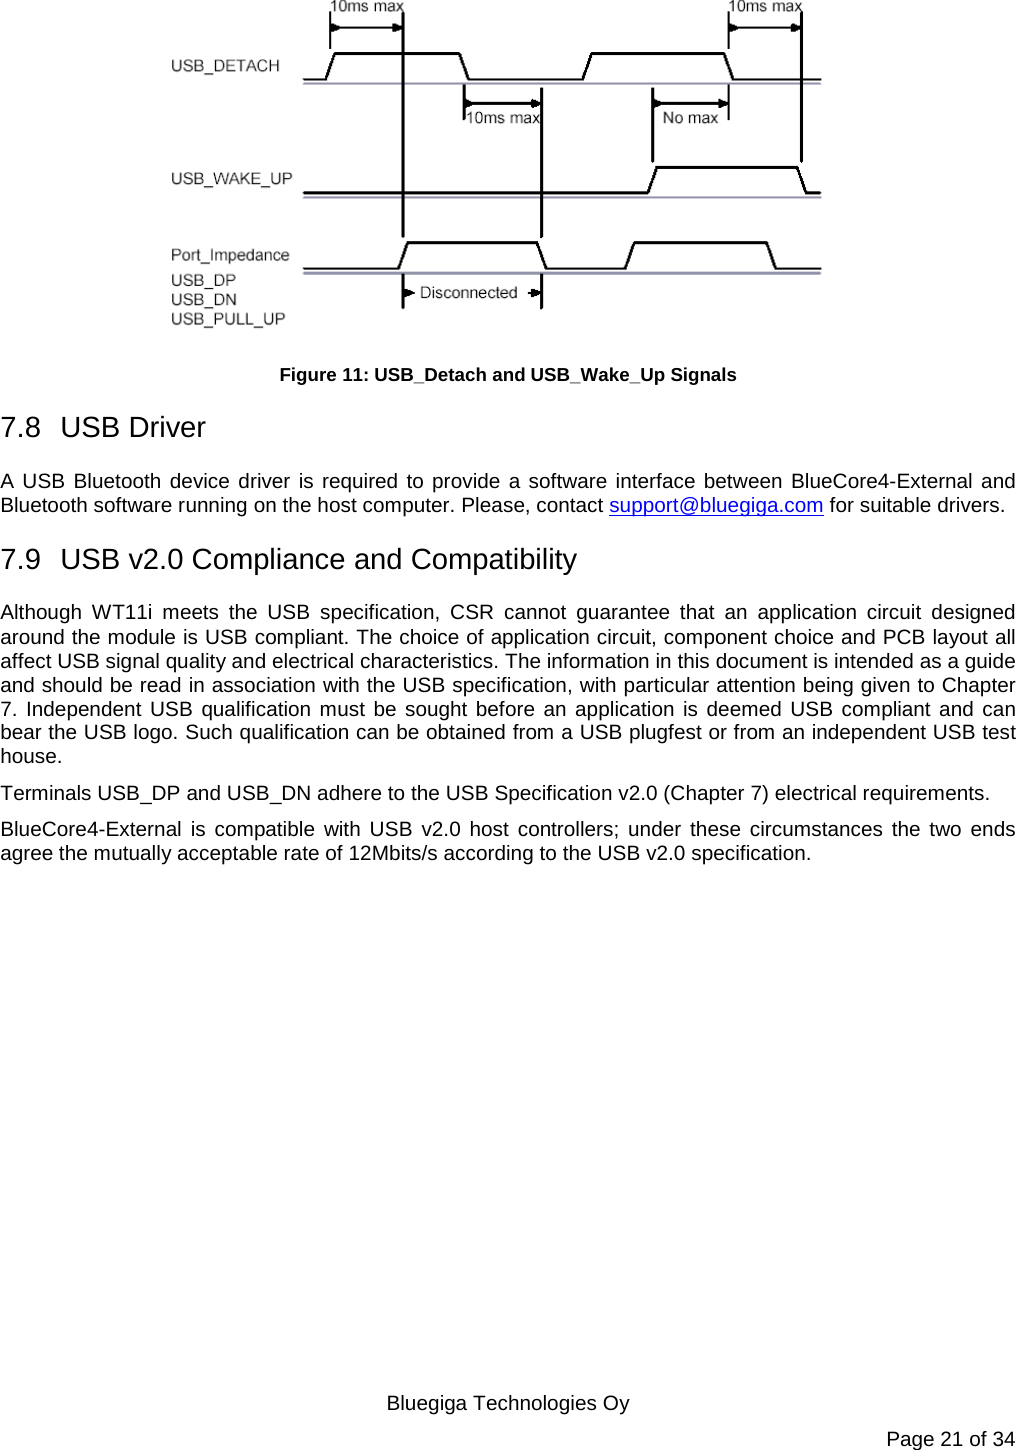   Bluegiga Technologies Oy Page 21 of 34  Figure 11: USB_Detach and USB_Wake_Up Signals 7.8 USB Driver A USB Bluetooth device driver is required to provide a software interface between BlueCore4-External and Bluetooth software running on the host computer. Please, contact support@bluegiga.com for suitable drivers. 7.9 USB v2.0 Compliance and Compatibility Although  WT11i meets the USB specification, CSR cannot guarantee that an application circuit  designed around the module is USB compliant. The choice of application circuit, component choice and PCB layout all affect USB signal quality and electrical characteristics. The information in this document is intended as a guide and should be read in association with the USB specification, with particular attention being given to Chapter 7. Independent USB qualification must be sought before an application is deemed USB compliant and can bear the USB logo. Such qualification can be obtained from a USB plugfest or from an independent USB test house. Terminals USB_DP and USB_DN adhere to the USB Specification v2.0 (Chapter 7) electrical requirements. BlueCore4-External is compatible with USB v2.0 host controllers; under these circumstances the two ends agree the mutually acceptable rate of 12Mbits/s according to the USB v2.0 specification.  